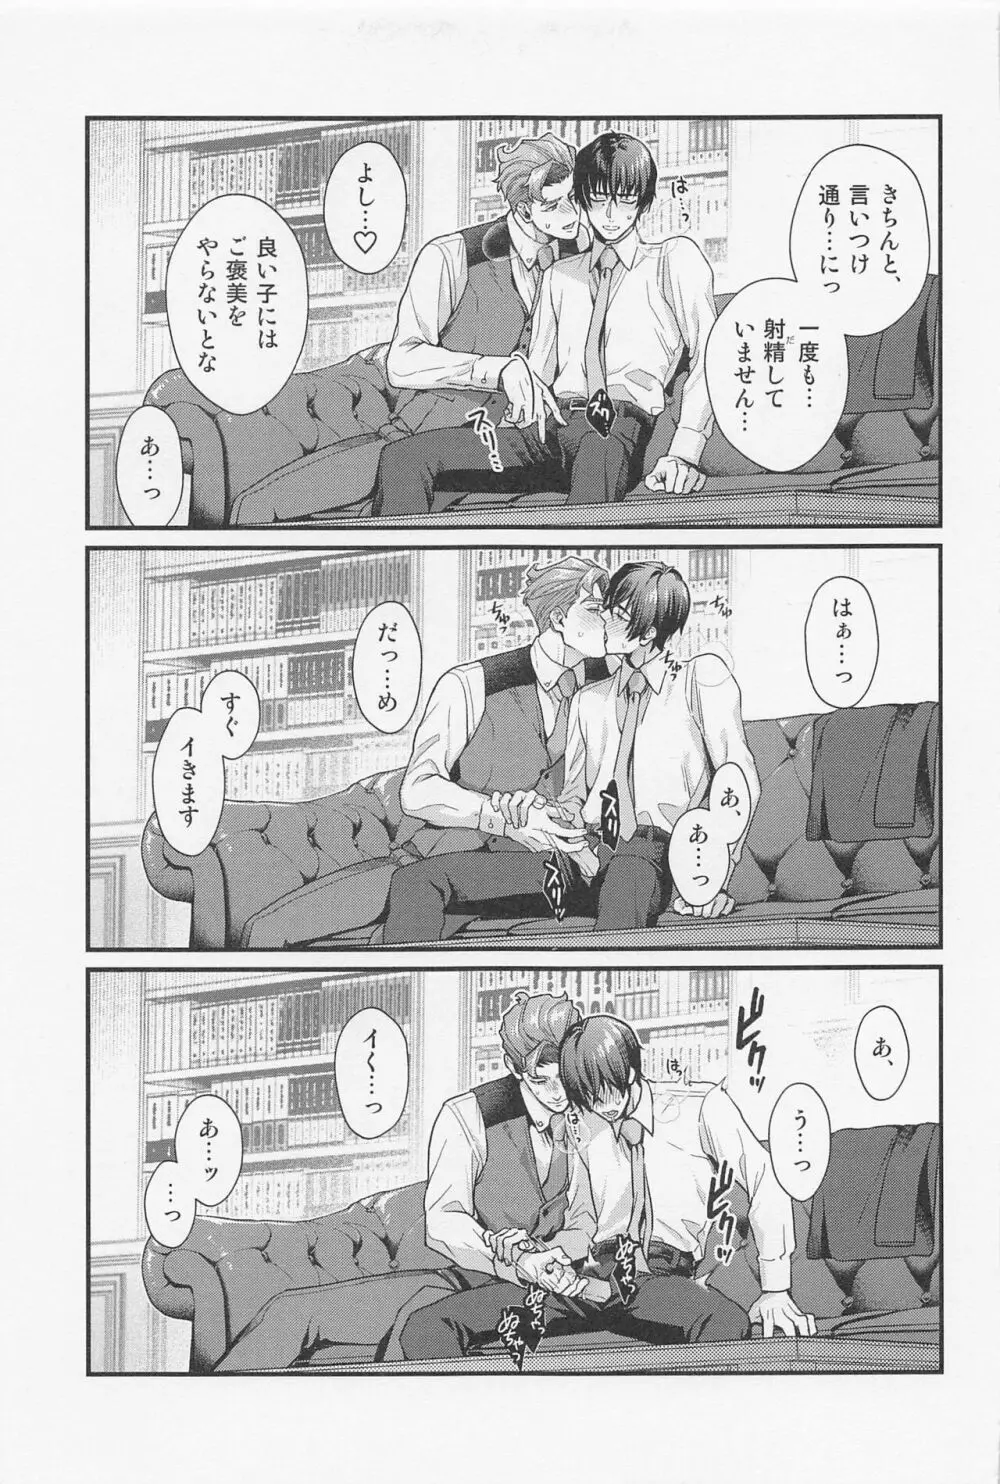 LOVE FIXED POINT - 愛の定点観測 - page6